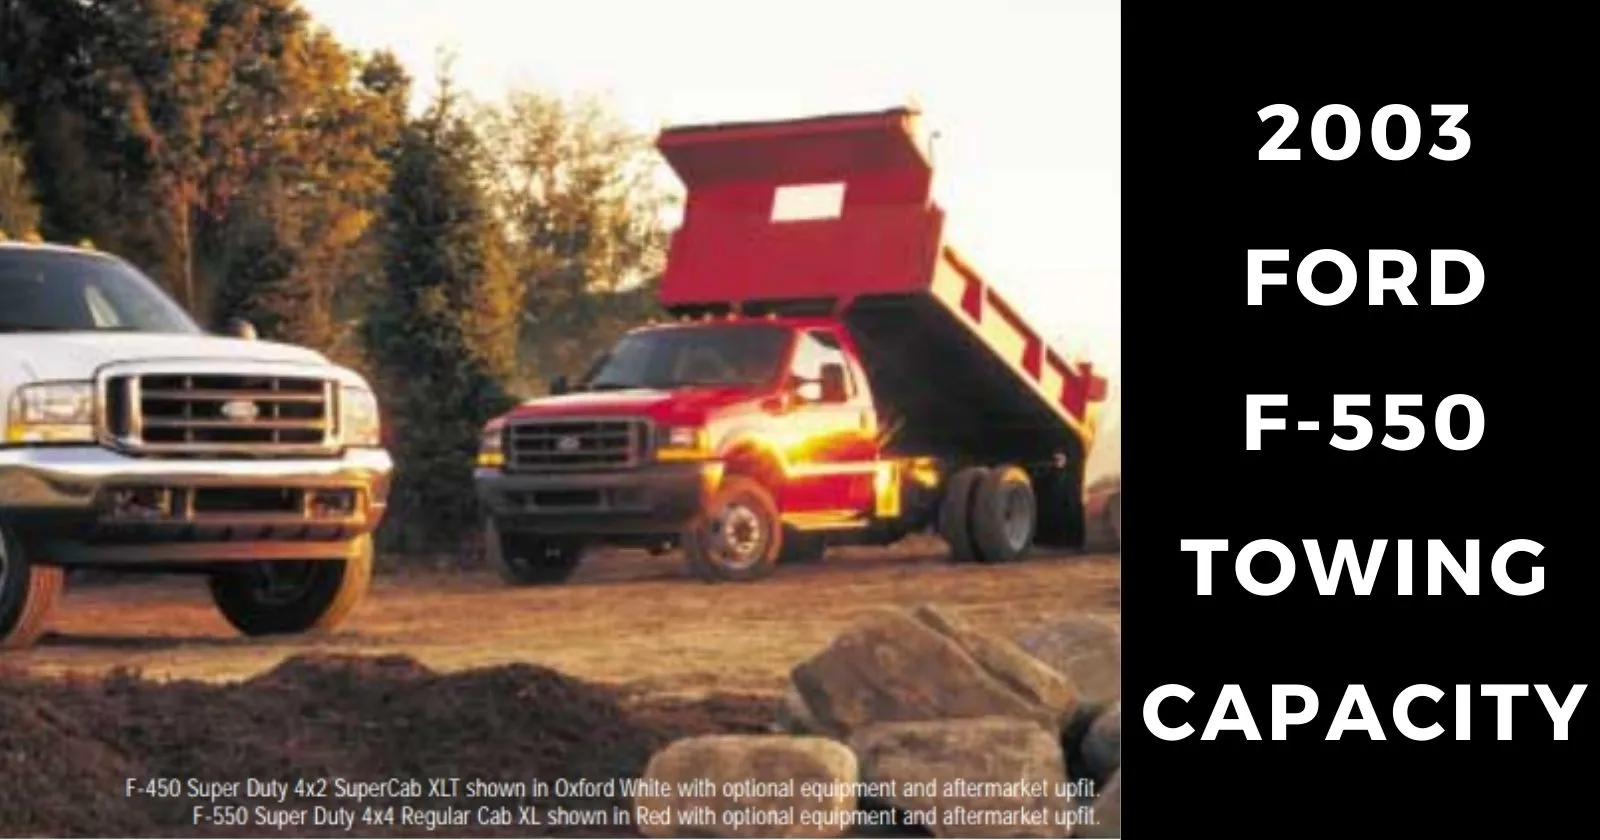 2003-ford-f550-towing-capacity-with-charts-thecartowing